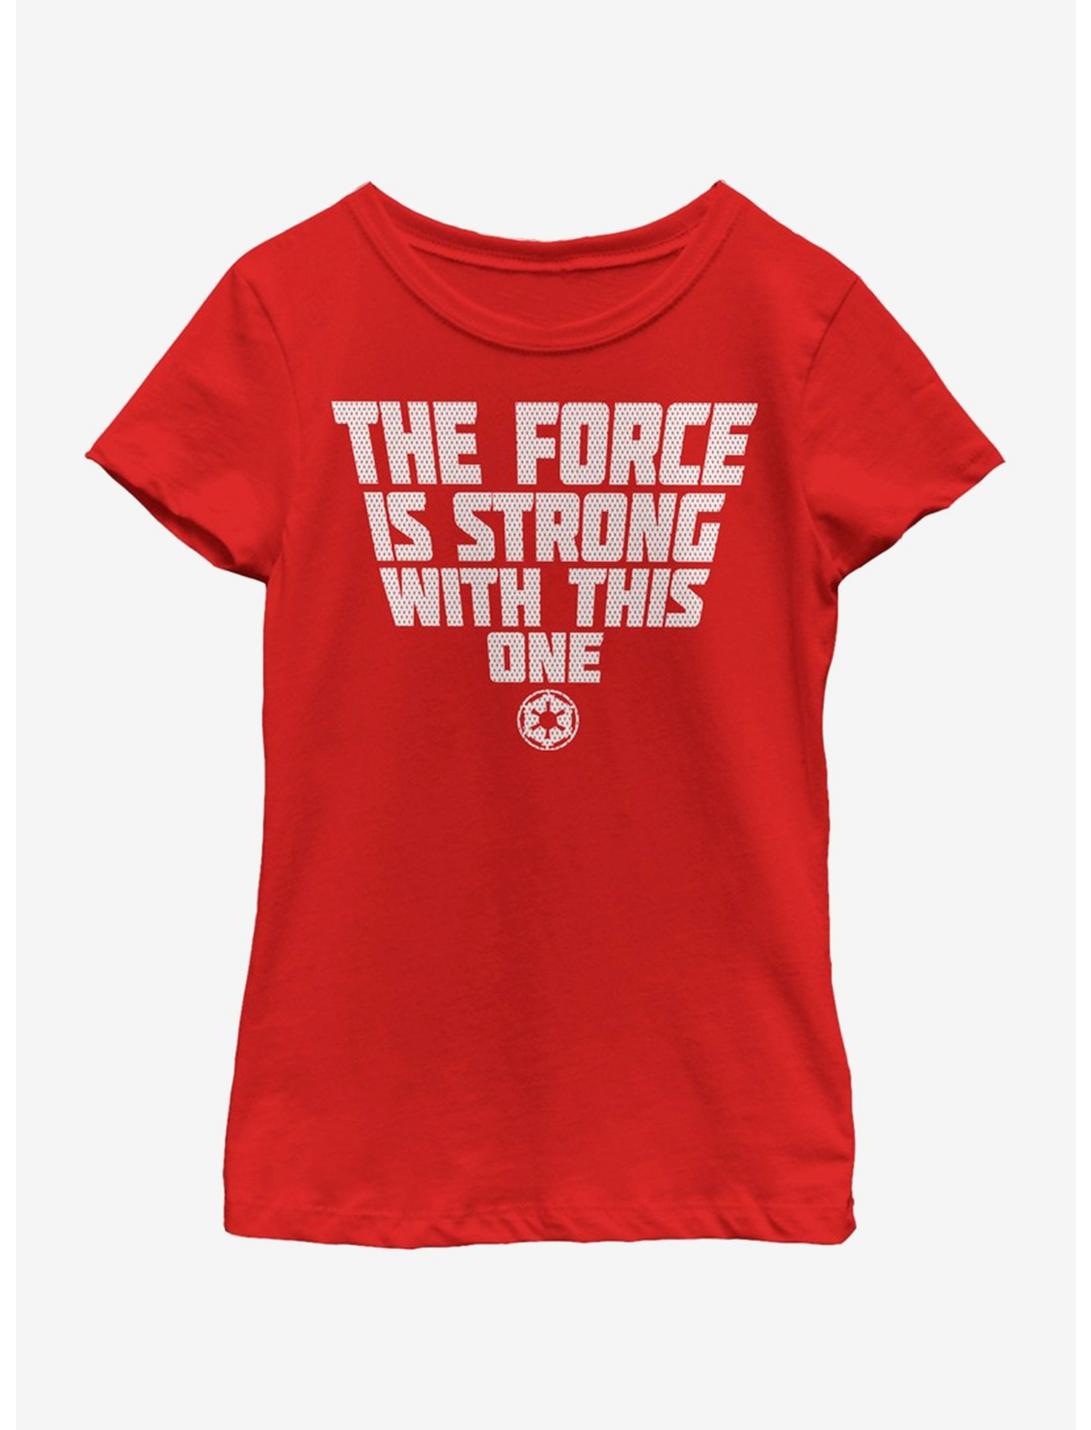 Star Wars Strong Force Youth Girls T-Shirt, RED, hi-res